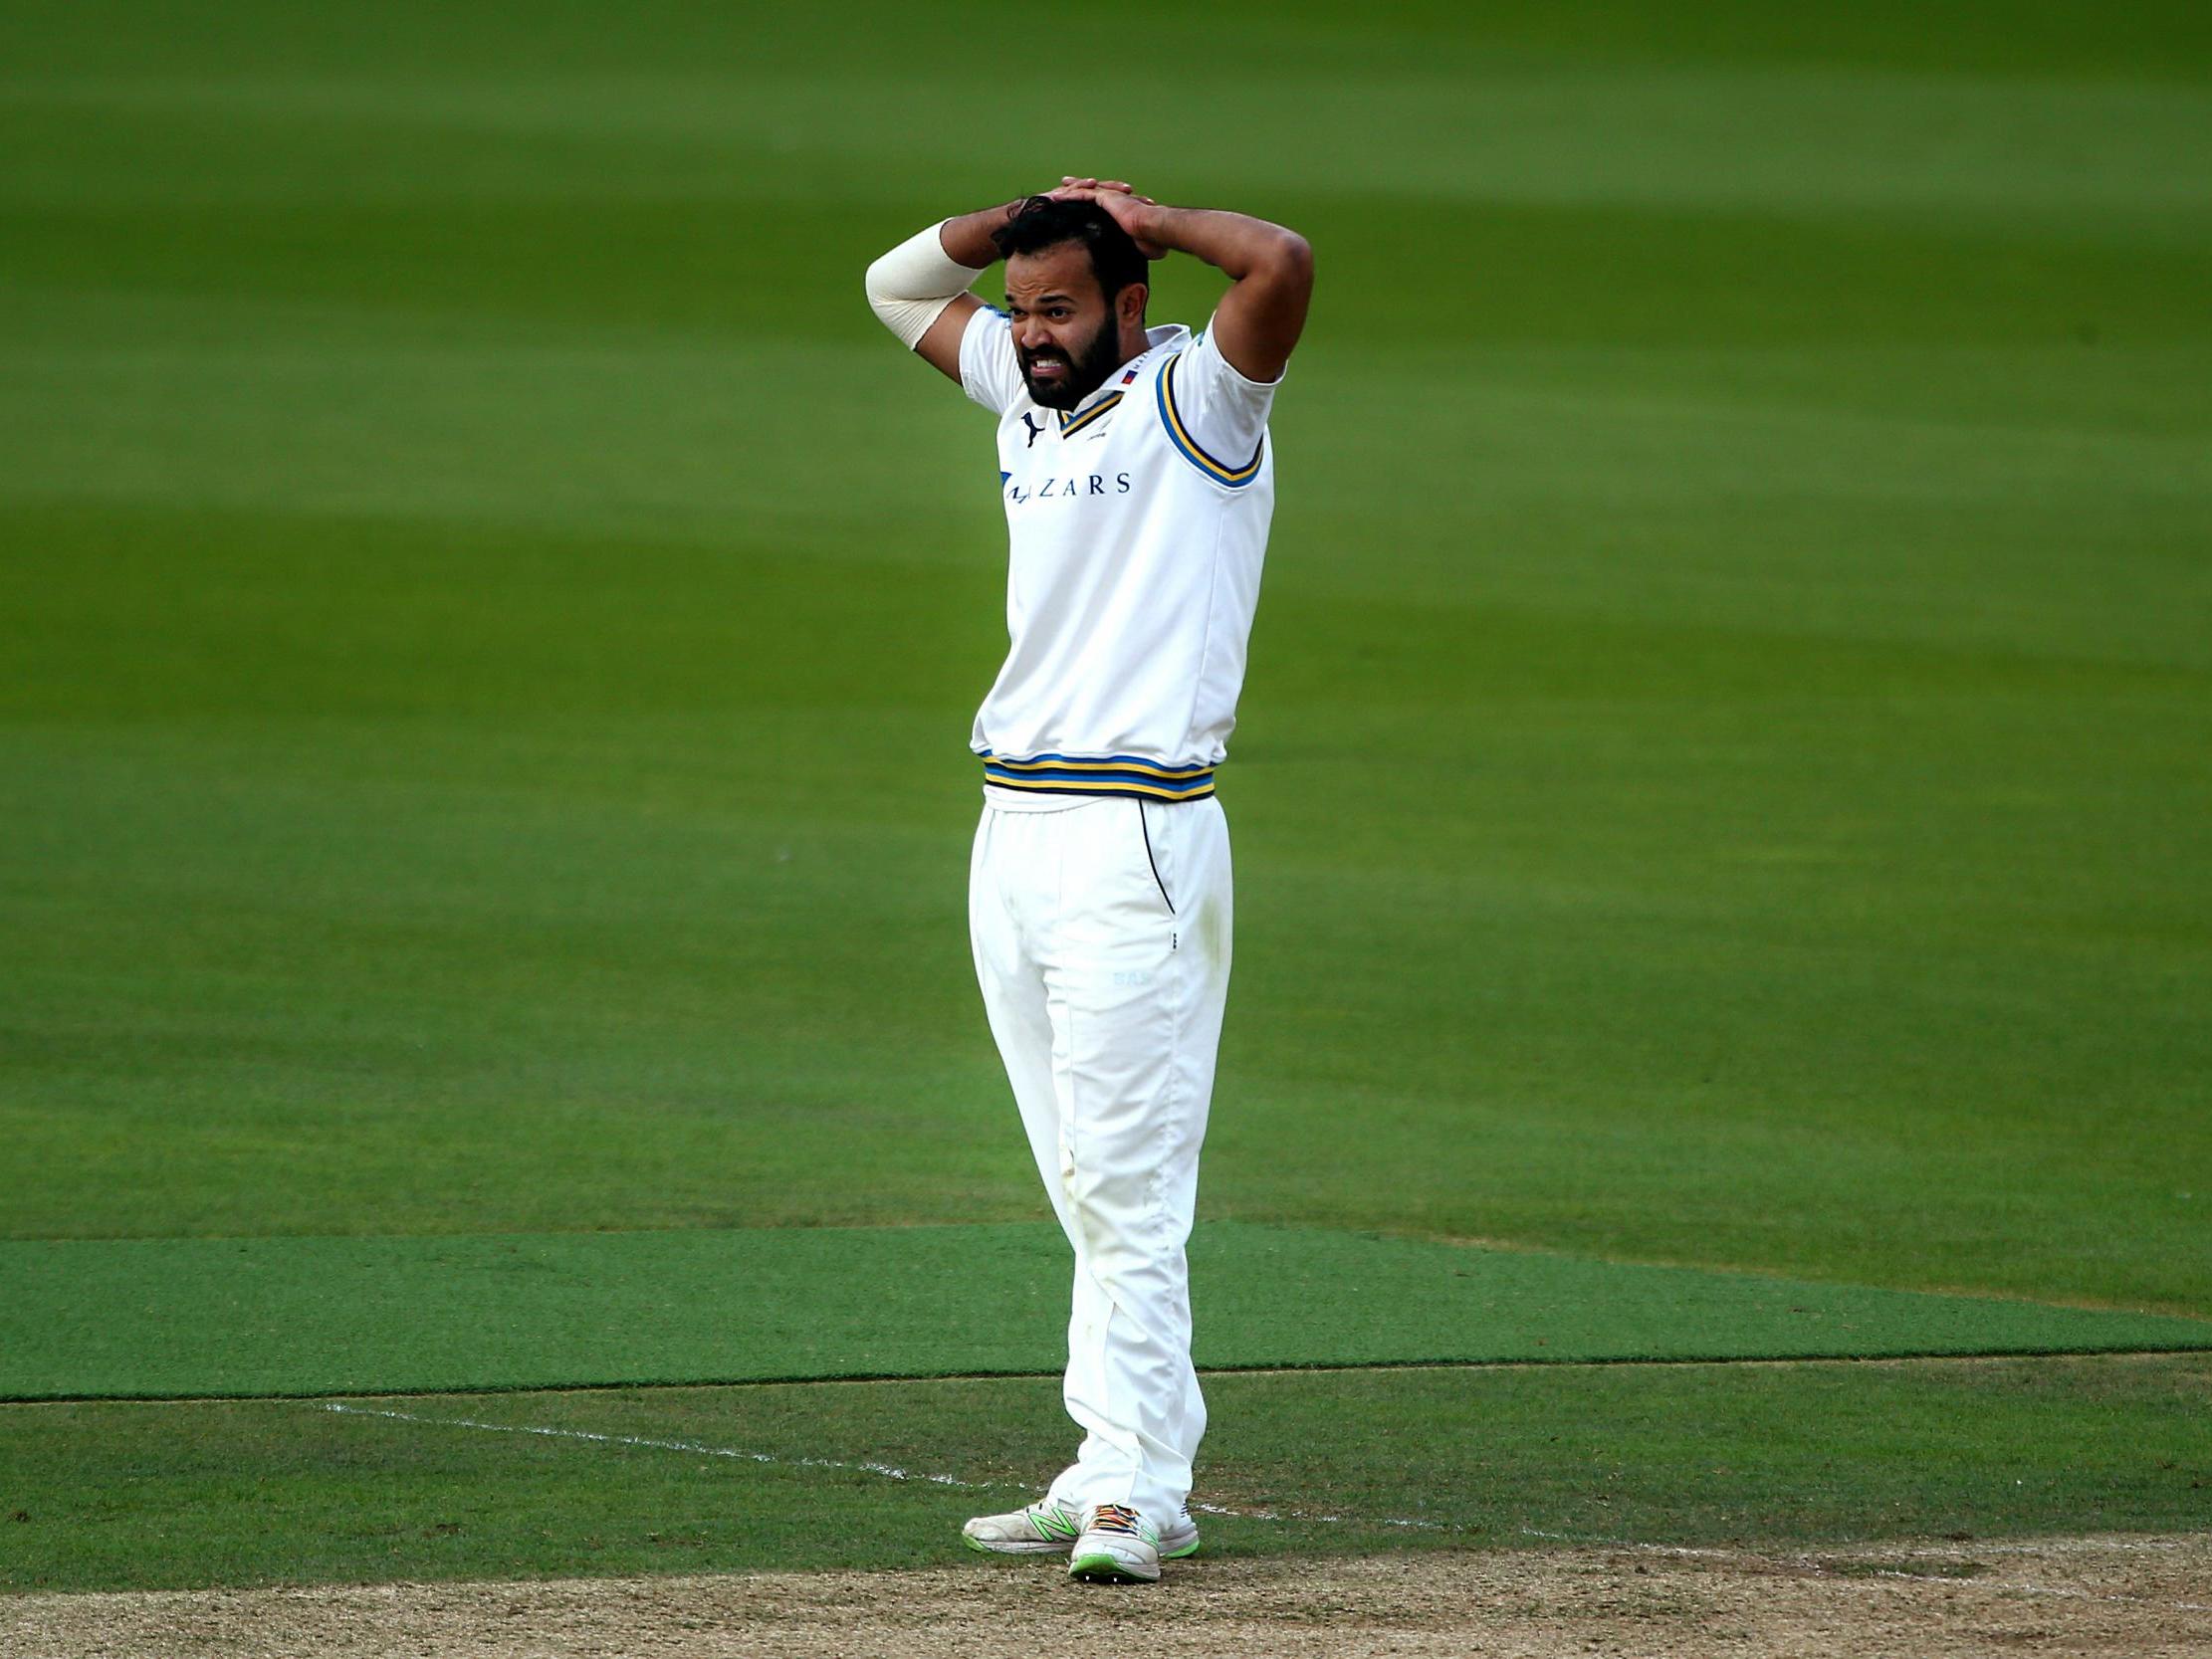 Former England youth captain quit the sport due to ‘institutional racism’ within the county cricket side after feeling he was isolated for his Muslim faith